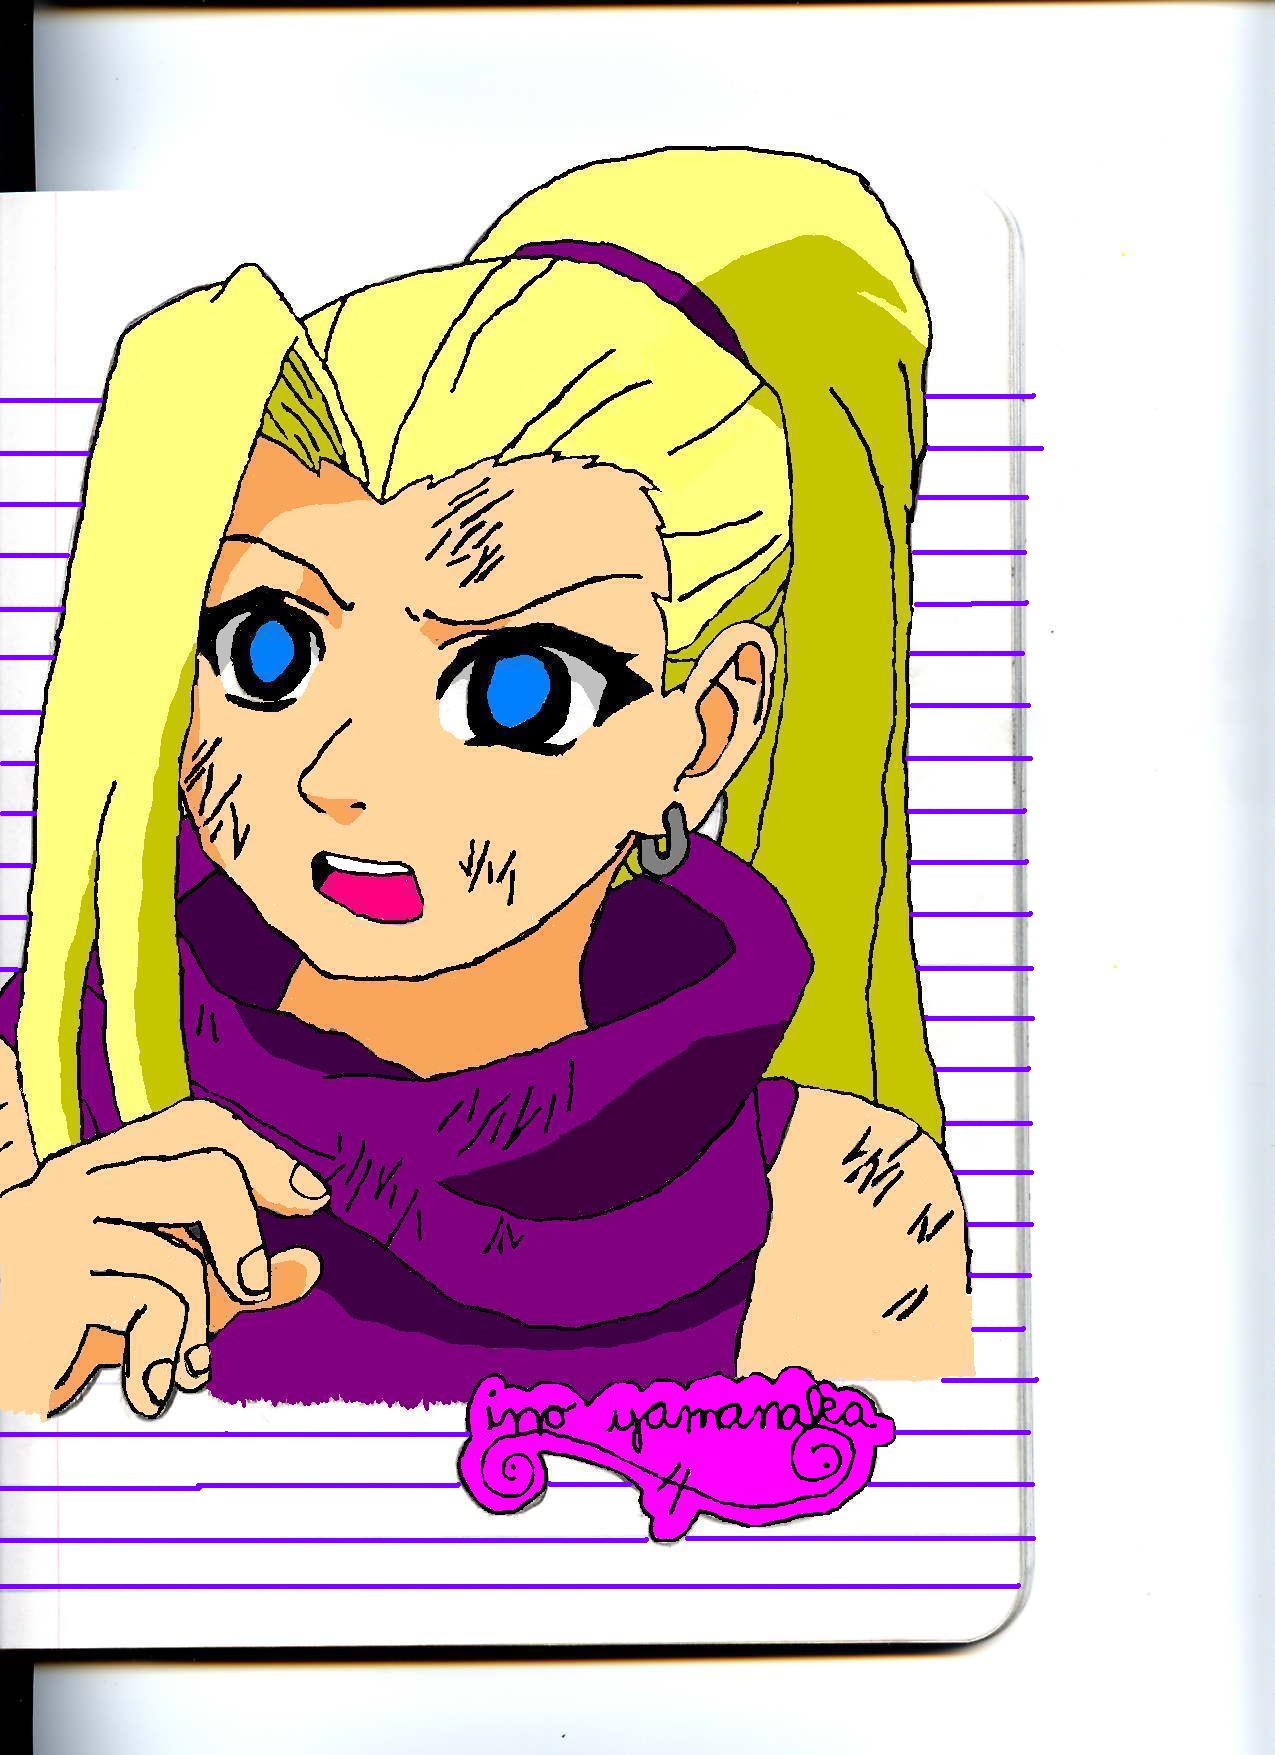 st pic of ino by gothicicequeen307